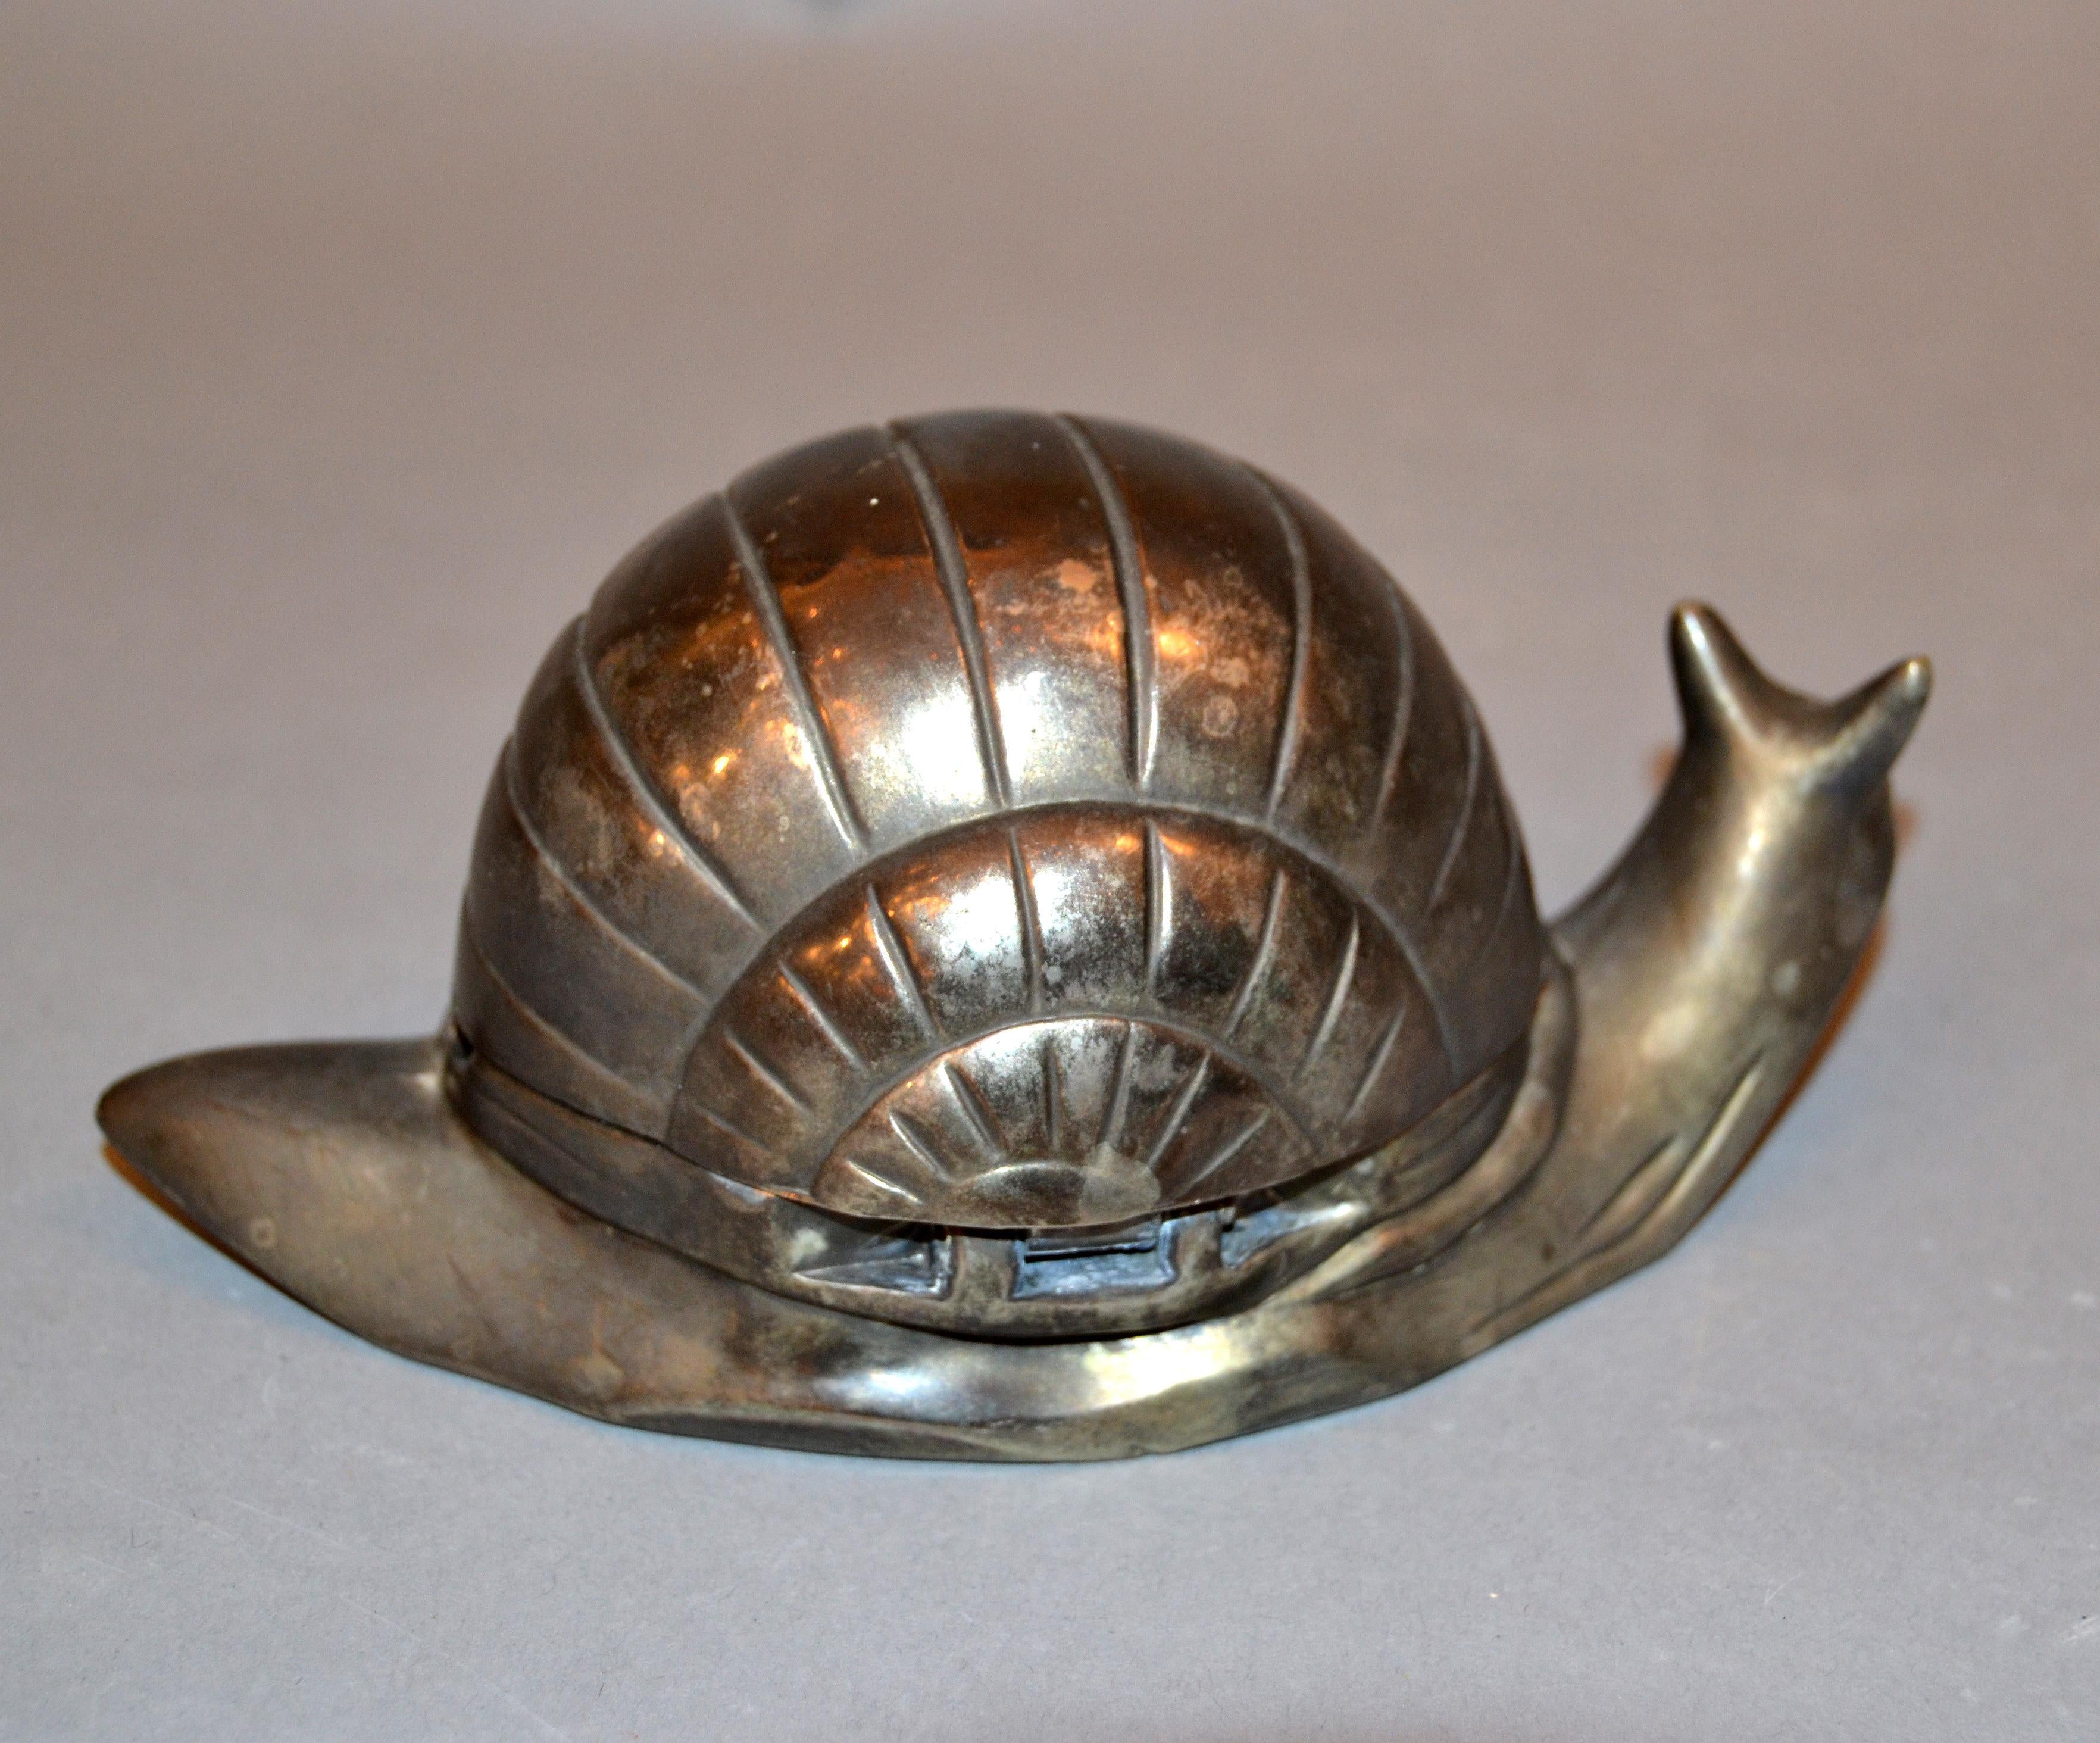 American Vintage Silver Plate Snail Salt Dish Spice Dish with Glass Inlay For Sale